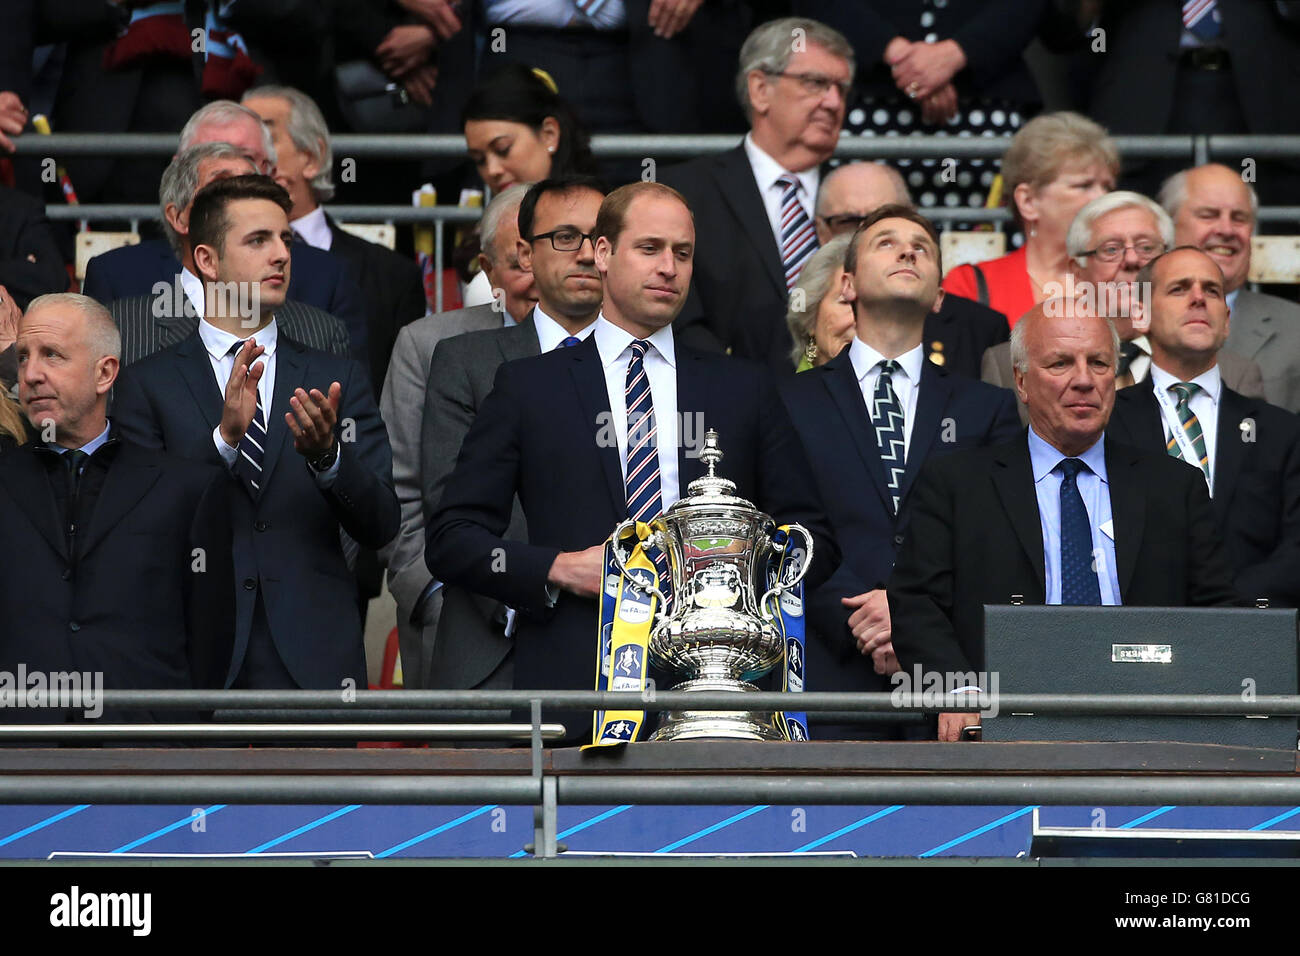 The Duke of Cambridge, President of The Football Association (centre) prepares to award the FA Cup trophy following the FA Cup Final at Wembley Stadium, London. PRESS ASSOCIATION Photo. Picture date: Saturday May 30, 2015. See PA Story SOCCER FA Cup. Photo credit should read: Nick Potts/PA Wire. RESTRICTIONS: Maximum 45 images during a match. No video emulation or promotion as 'live'. No use in games, competitions, merchandise, betting or single club/player services. No use with unofficial audio, video, data, fixture Stock Photo